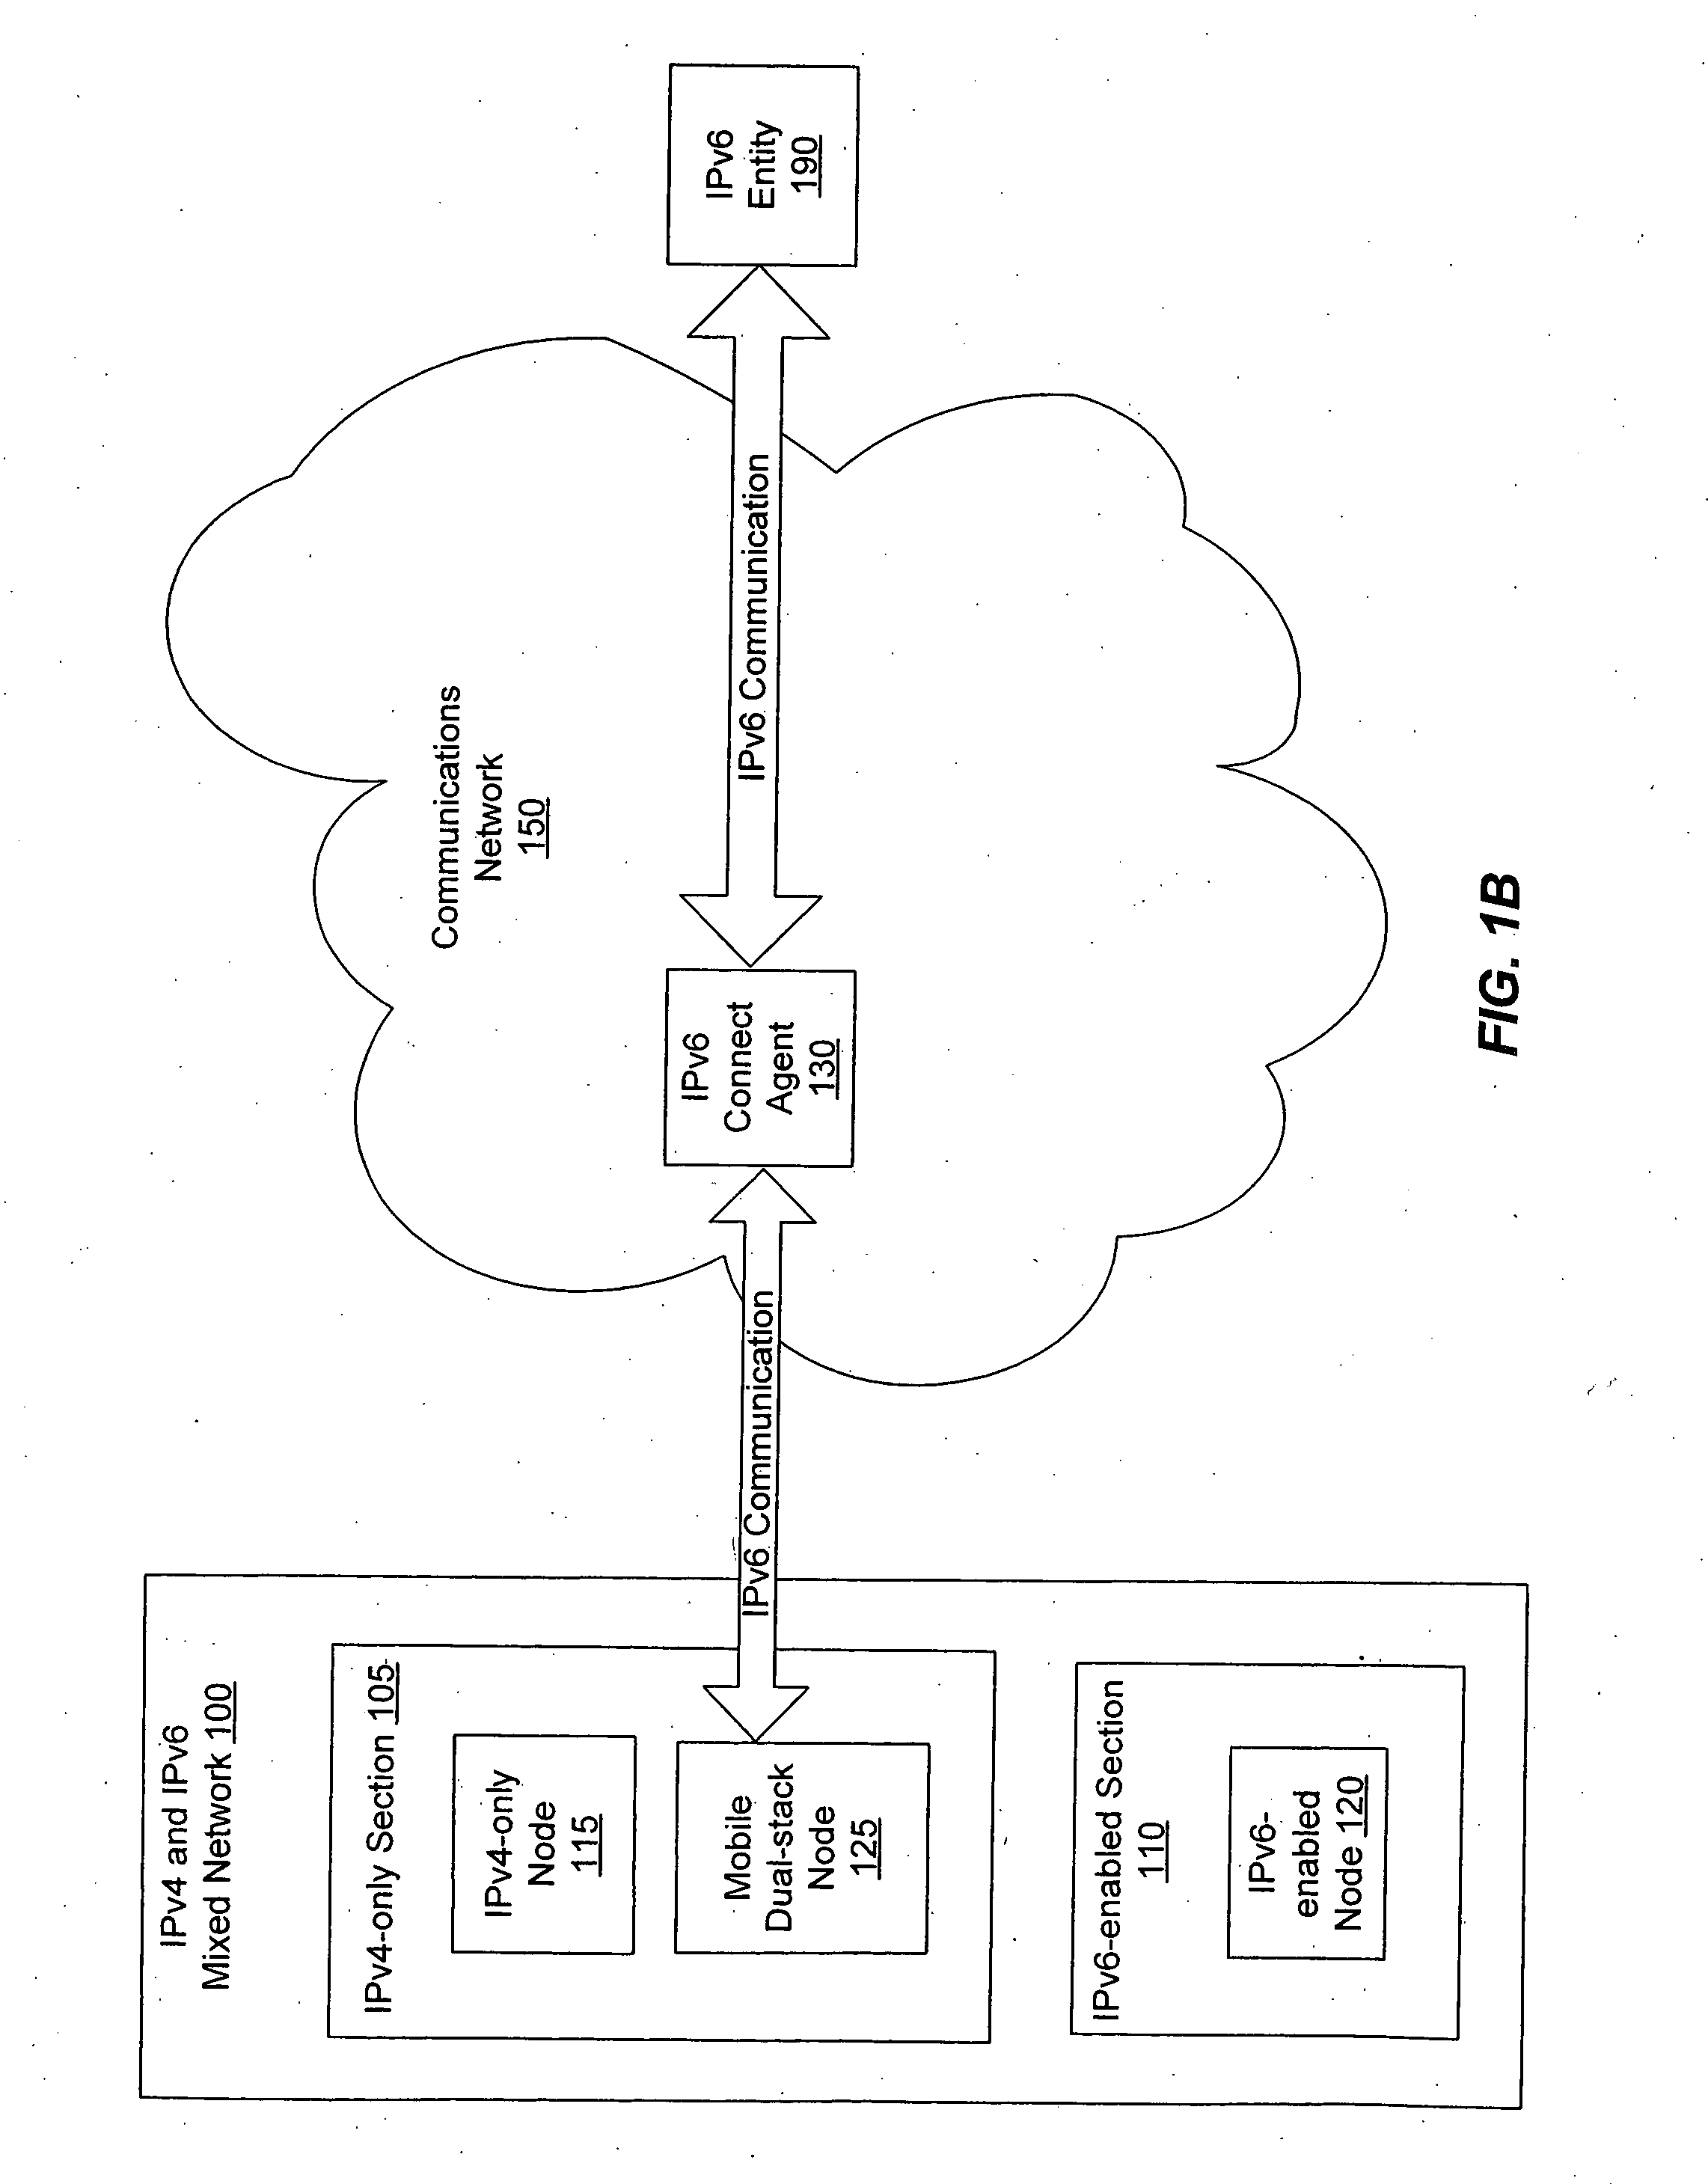 Enabling mobile IPv6 communication over a network containing IPv4 components using ISATAP